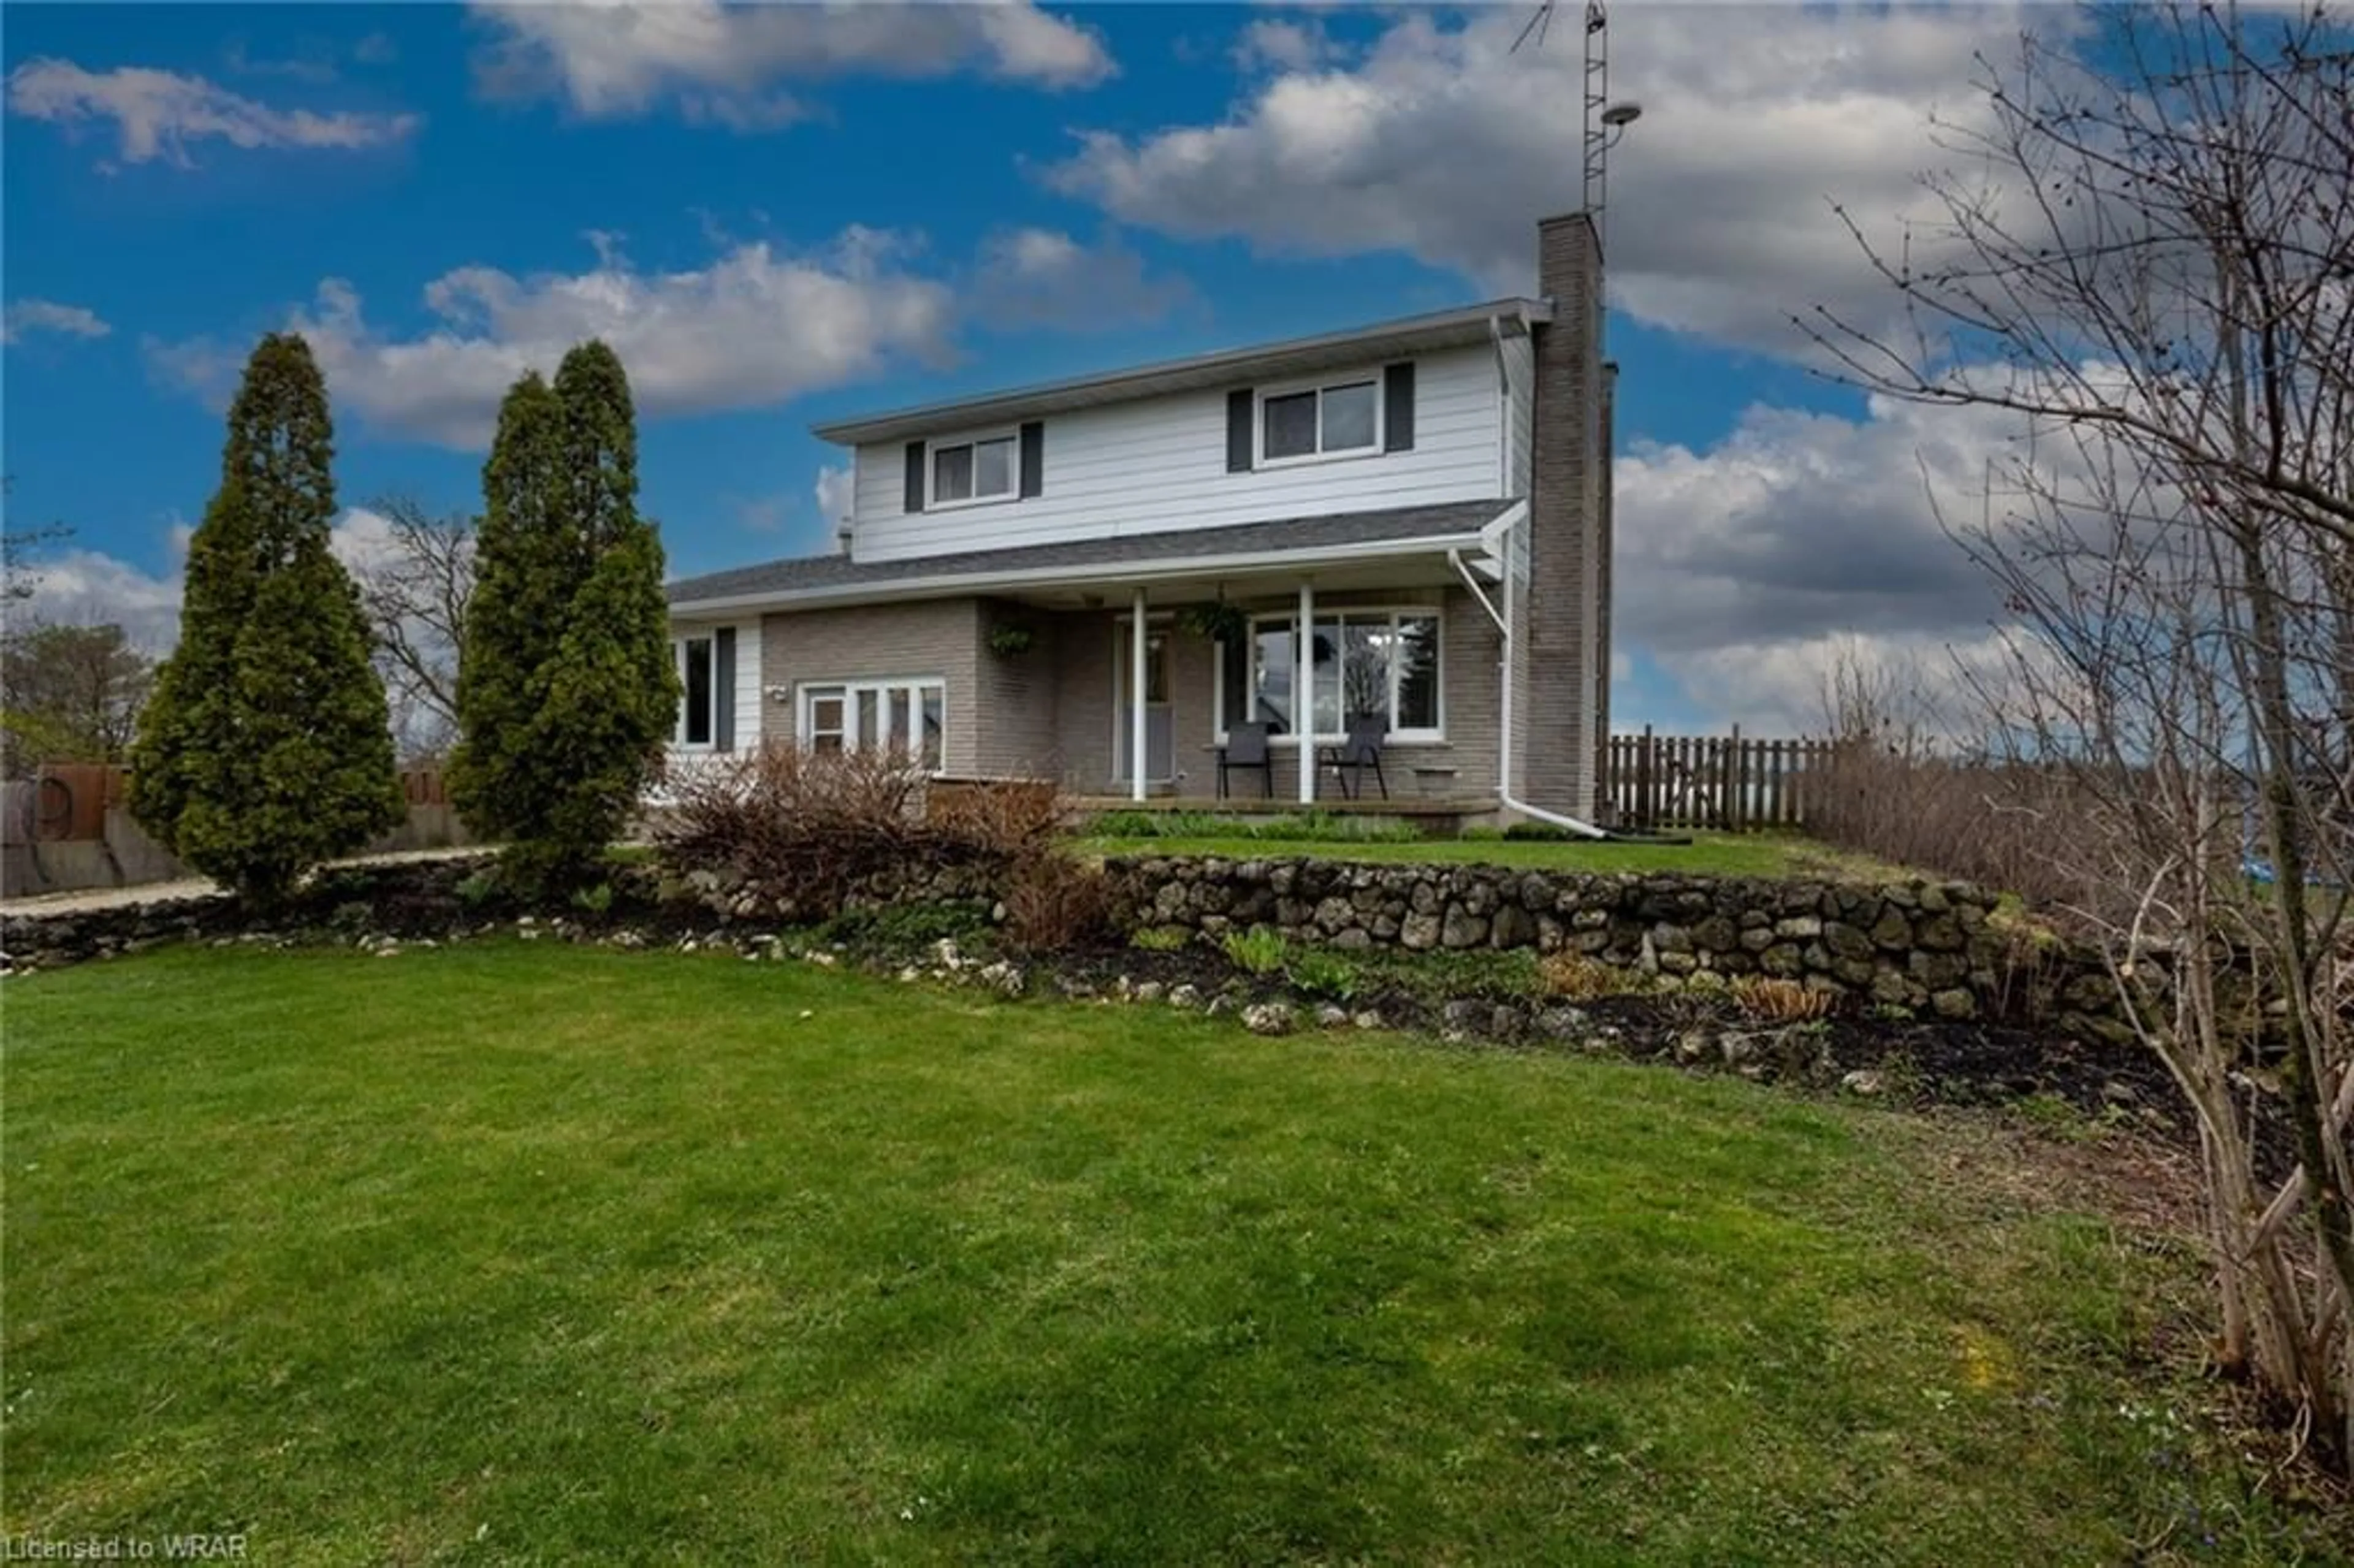 Frontside or backside of a home for 224241 Southgate Road 22 Rd, Holstein Ontario N0G 2A0